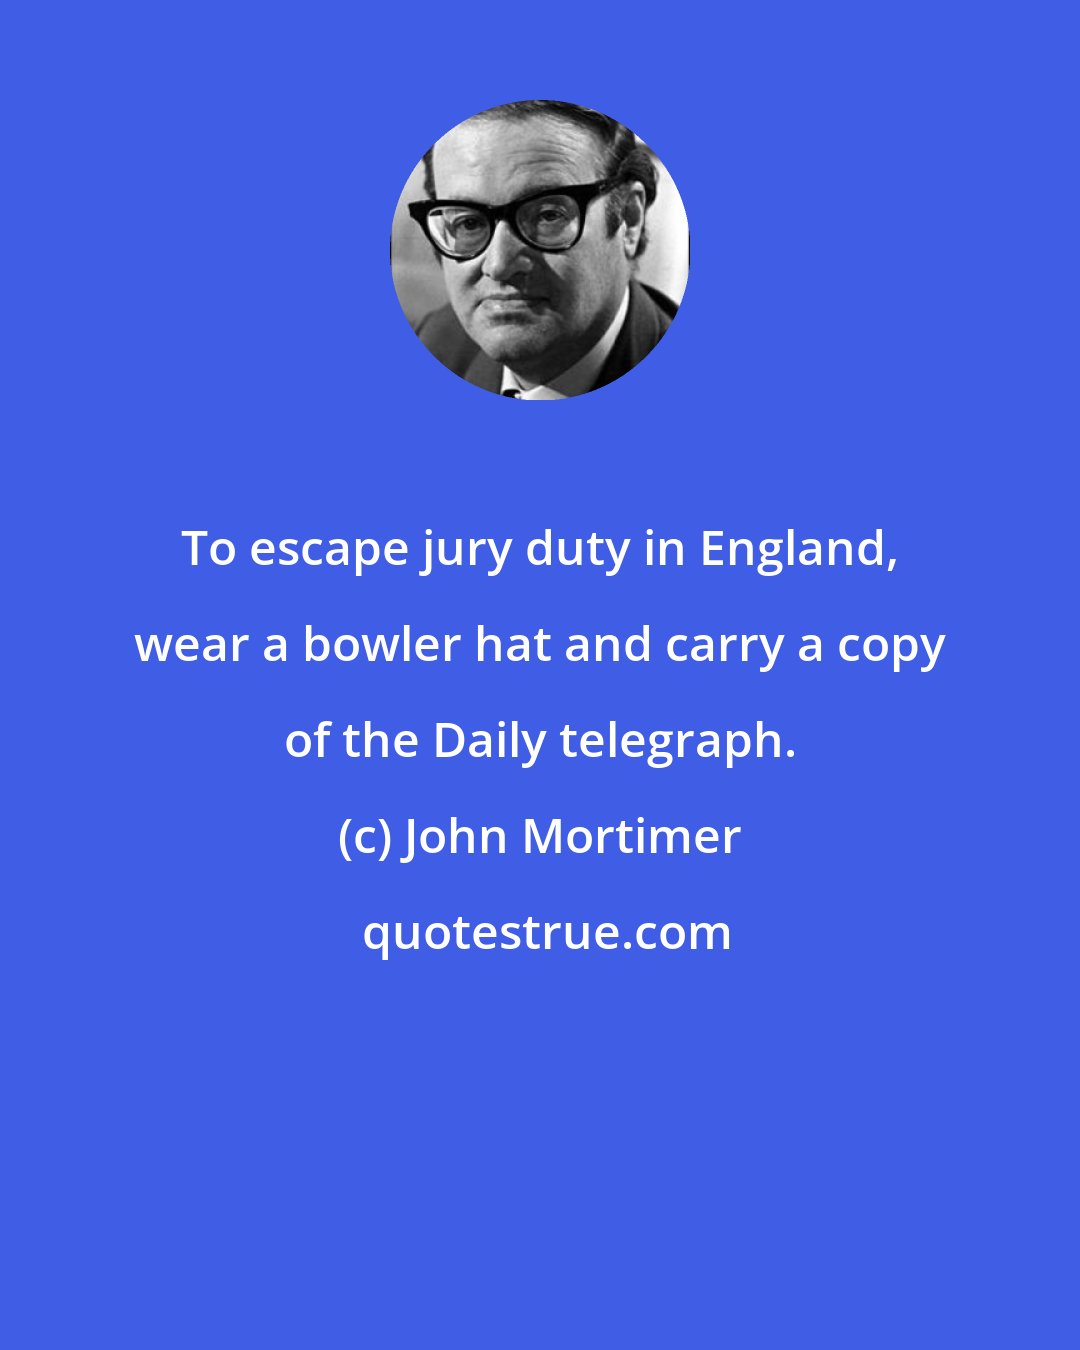 John Mortimer: To escape jury duty in England, wear a bowler hat and carry a copy of the Daily telegraph.